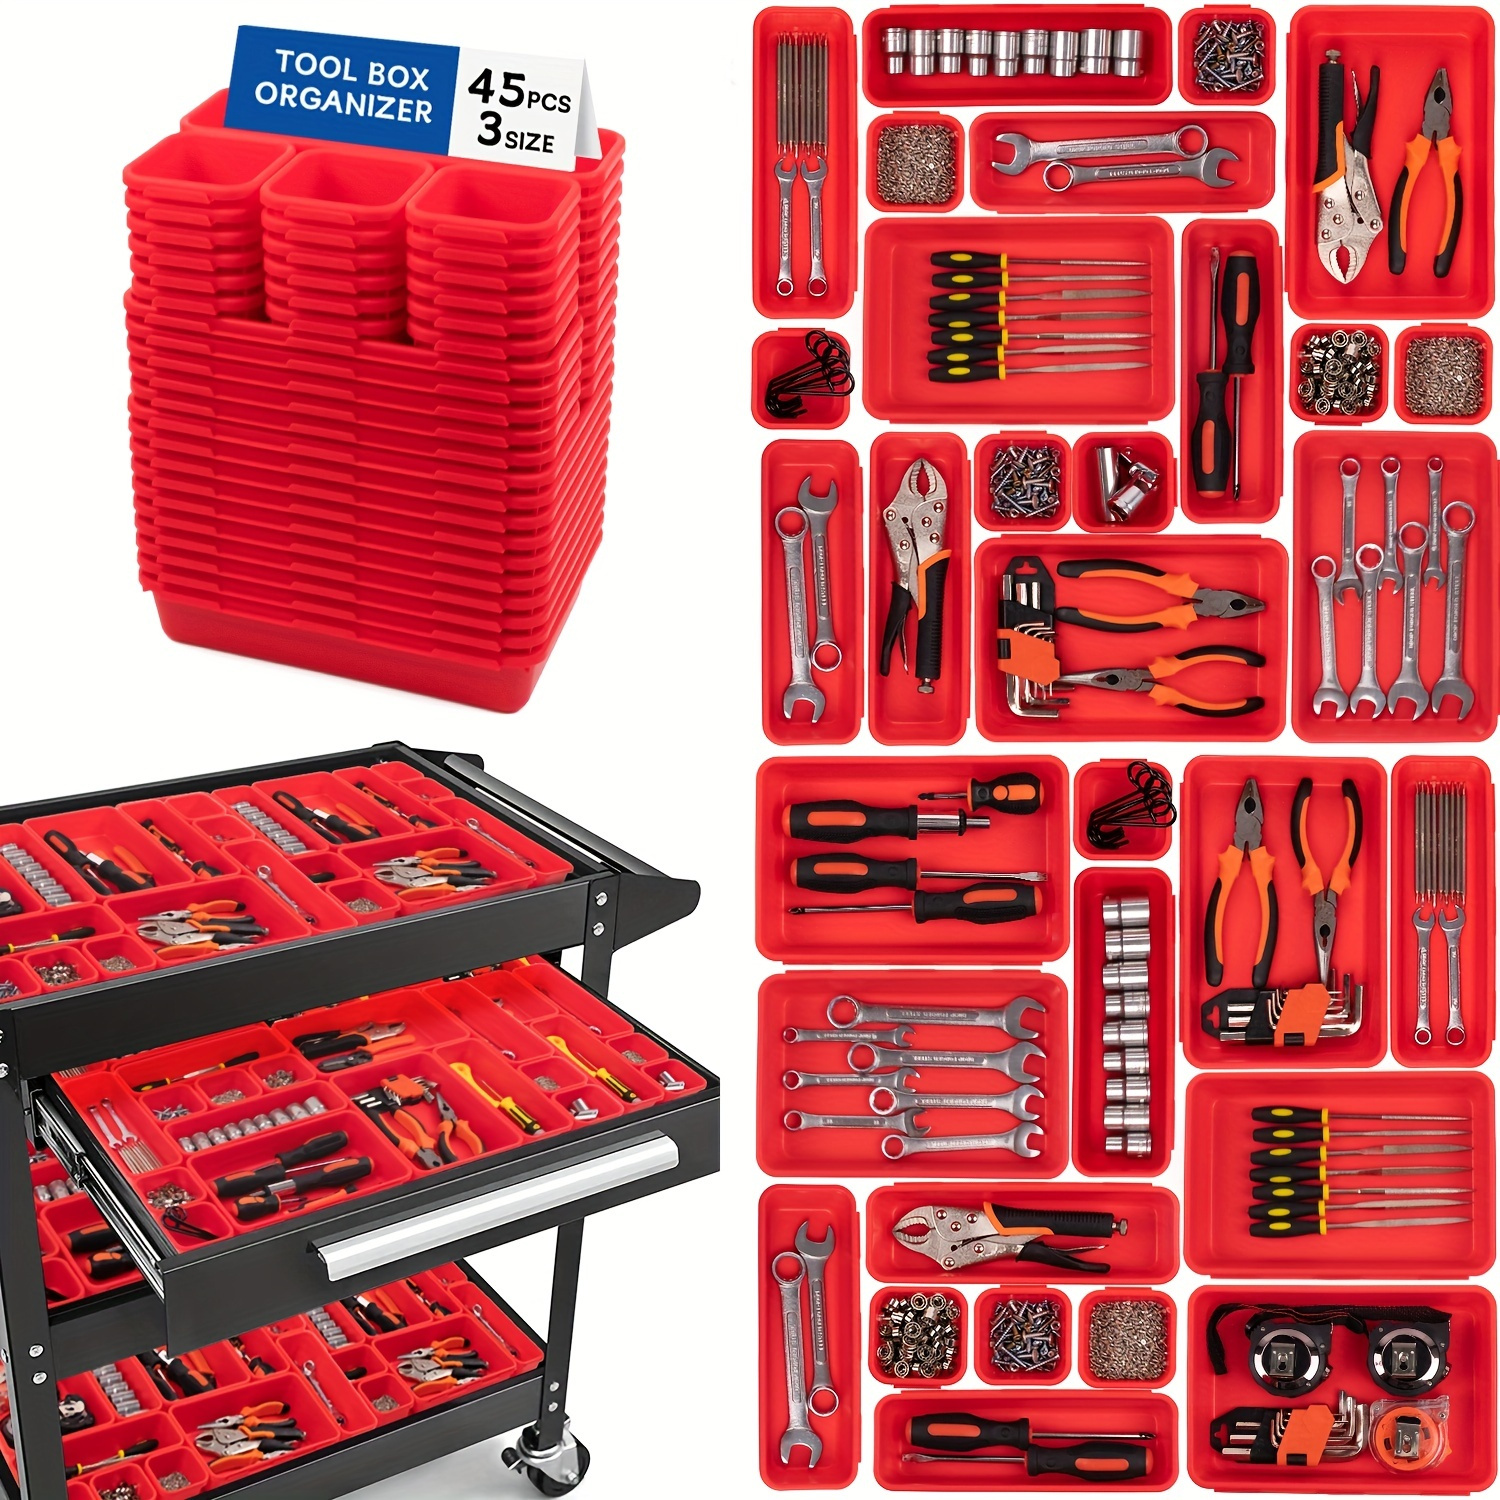 OHHSUN 32pcs Tool Box Organizer Tray Dividers Set, Toolbox Organizer, Desk Drawer  Organizer, Rolling Tool Chest Cart Cabinet Workbench for Parts, Screws,  Nuts, Screwdrivers, pliers,Tools Organization 